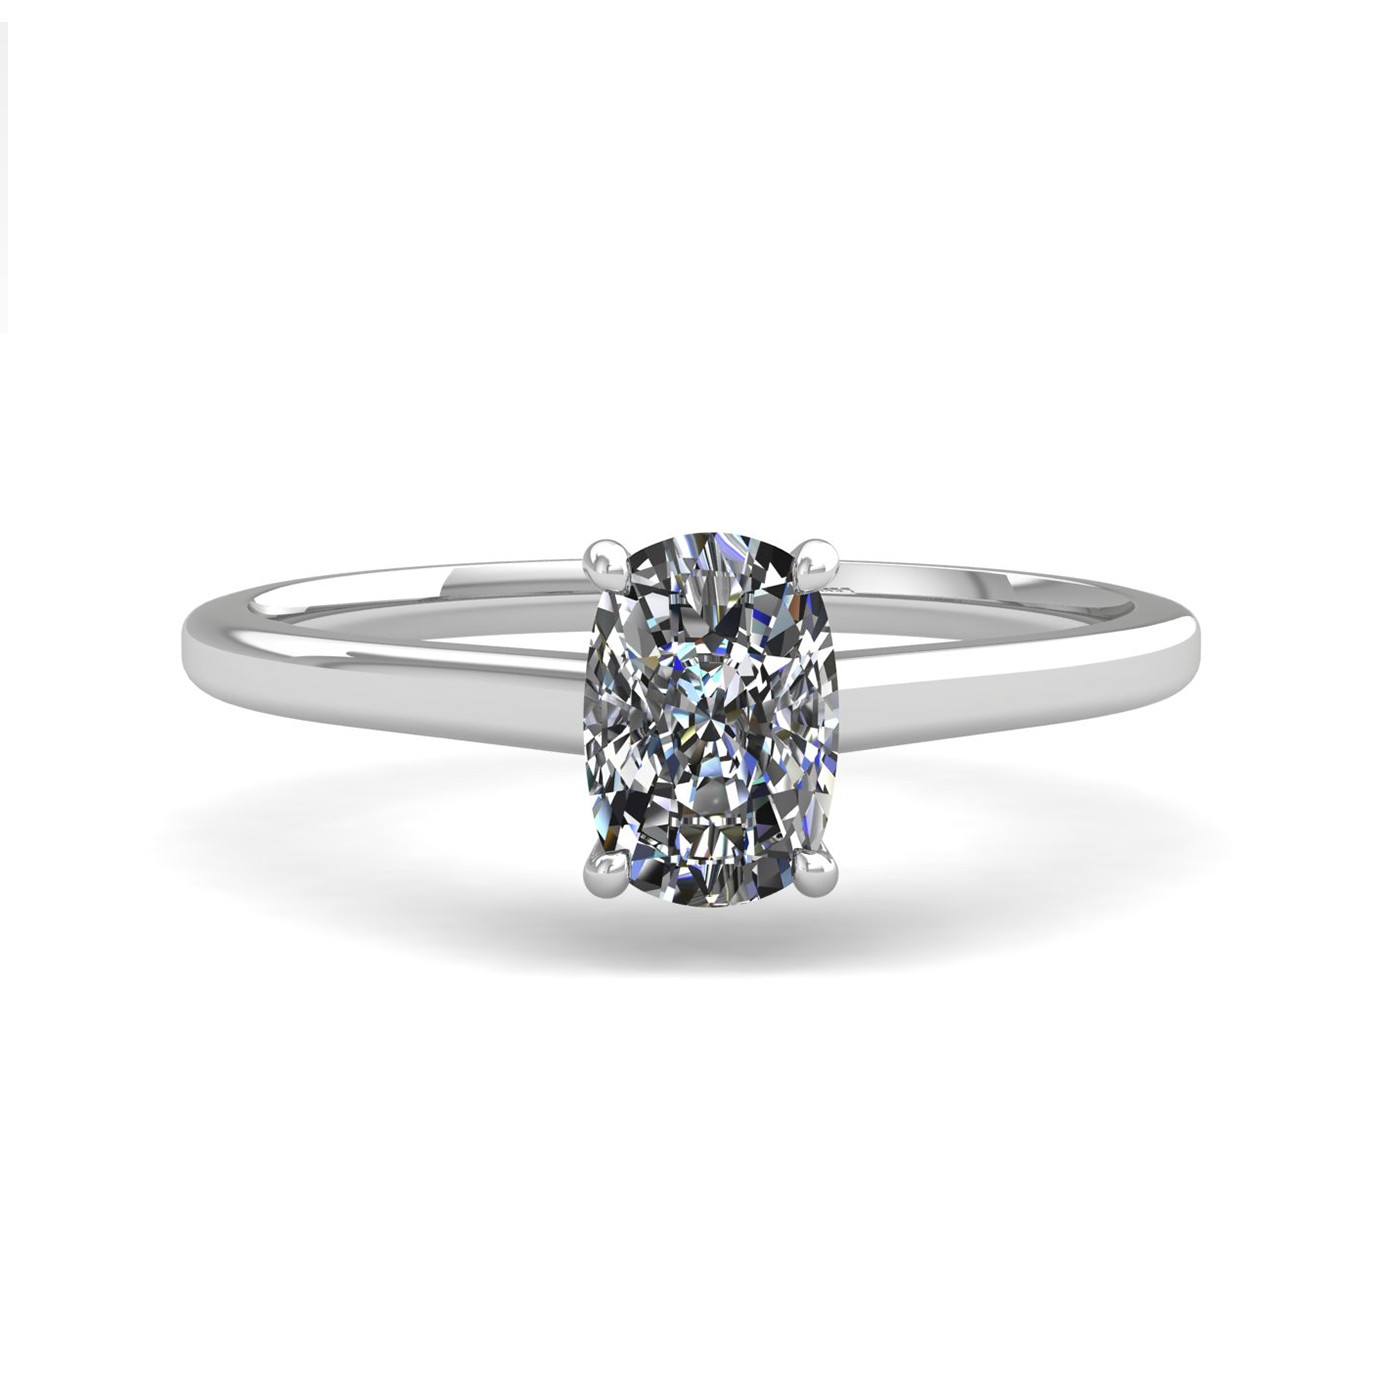 18k white gold 1,00 ct 4 prongs solitaire elongated cushion cut diamond engagement ring with whisper thin band